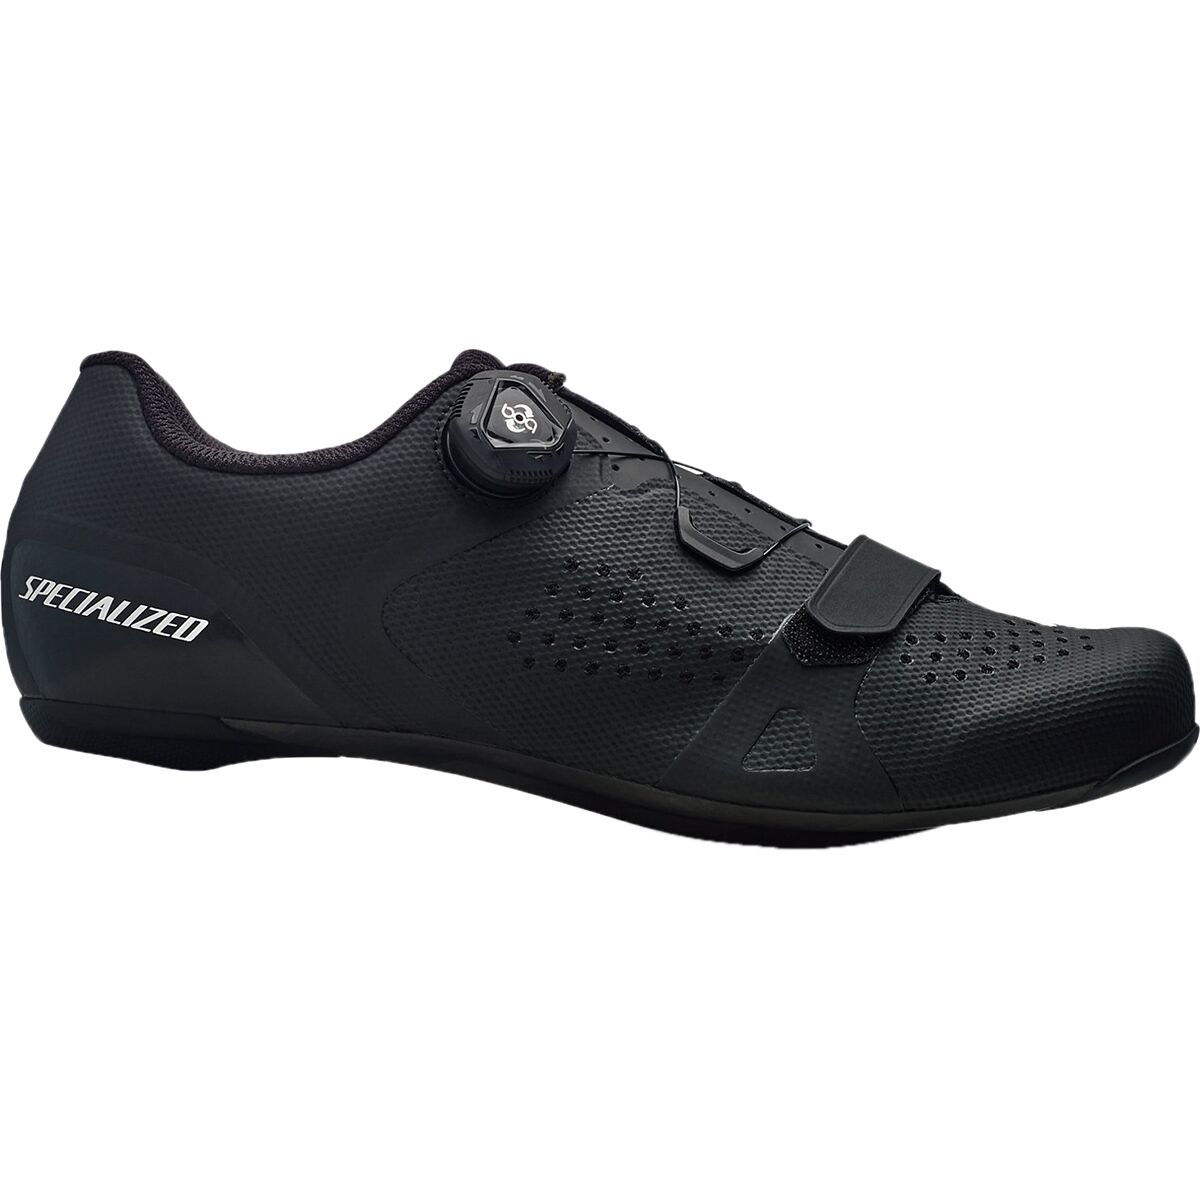 Specialized Torch 2.0 Wide Cycling Shoe